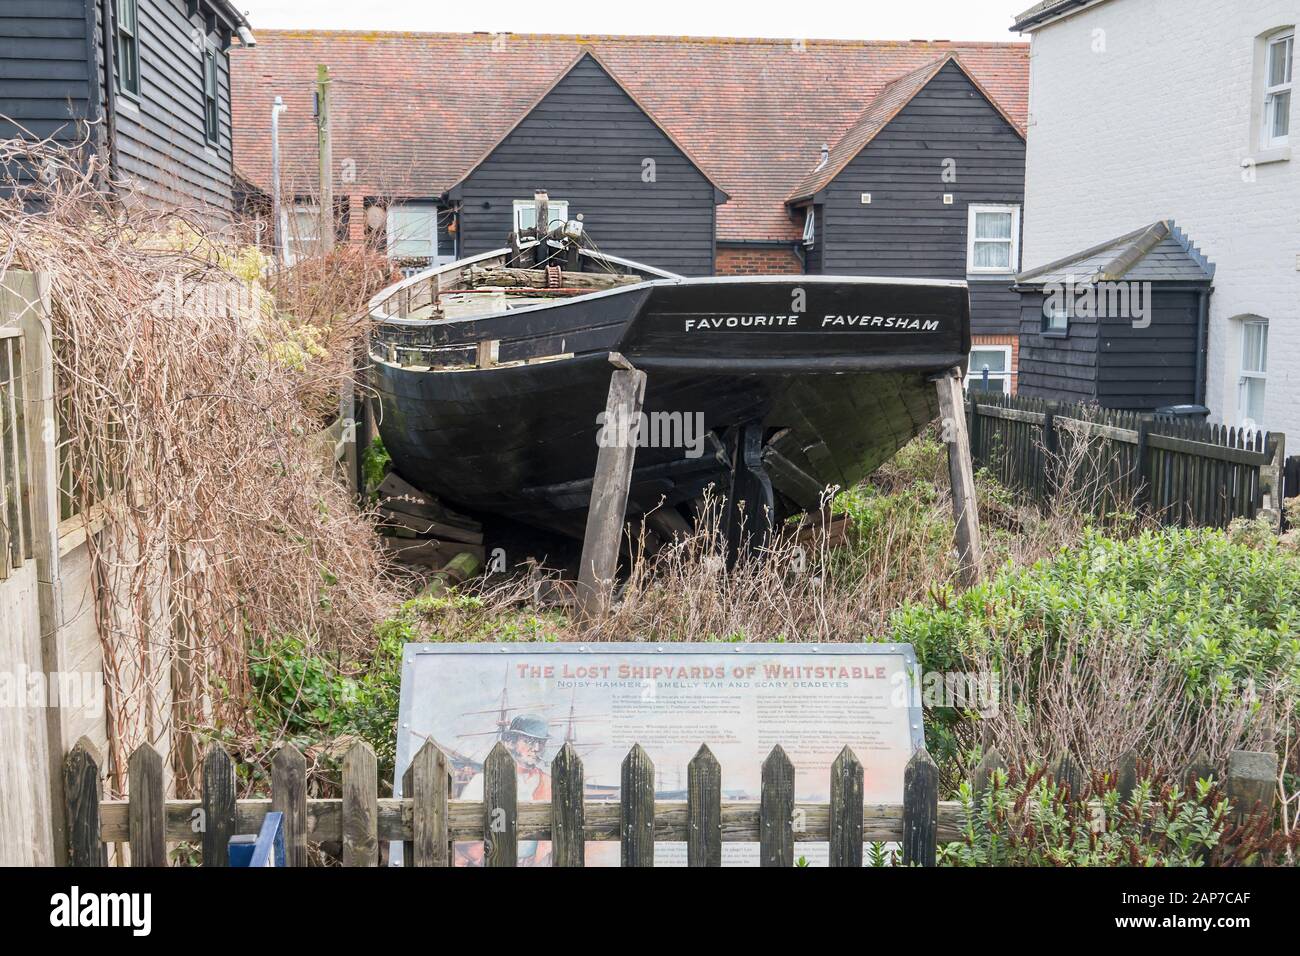 FAVOURITE is known as a Whitstable oyster yawl and was built by the Whitstable Shipbuilding Company based at Island Wall, Whitstable, in 1890. Stock Photo